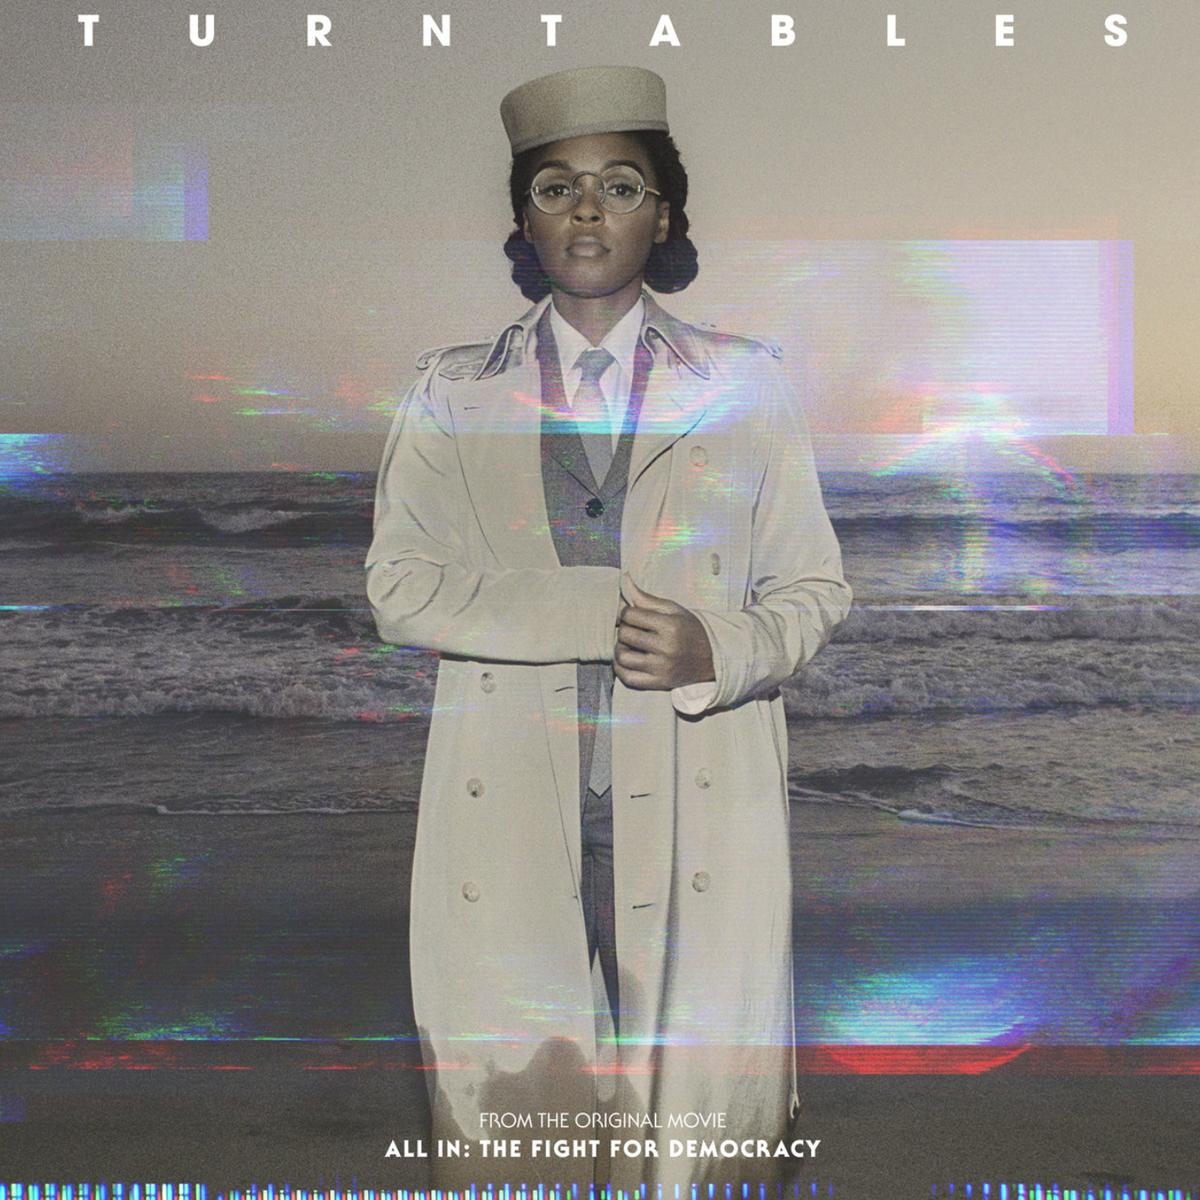 Janelle Monae Returns With “Turntables”